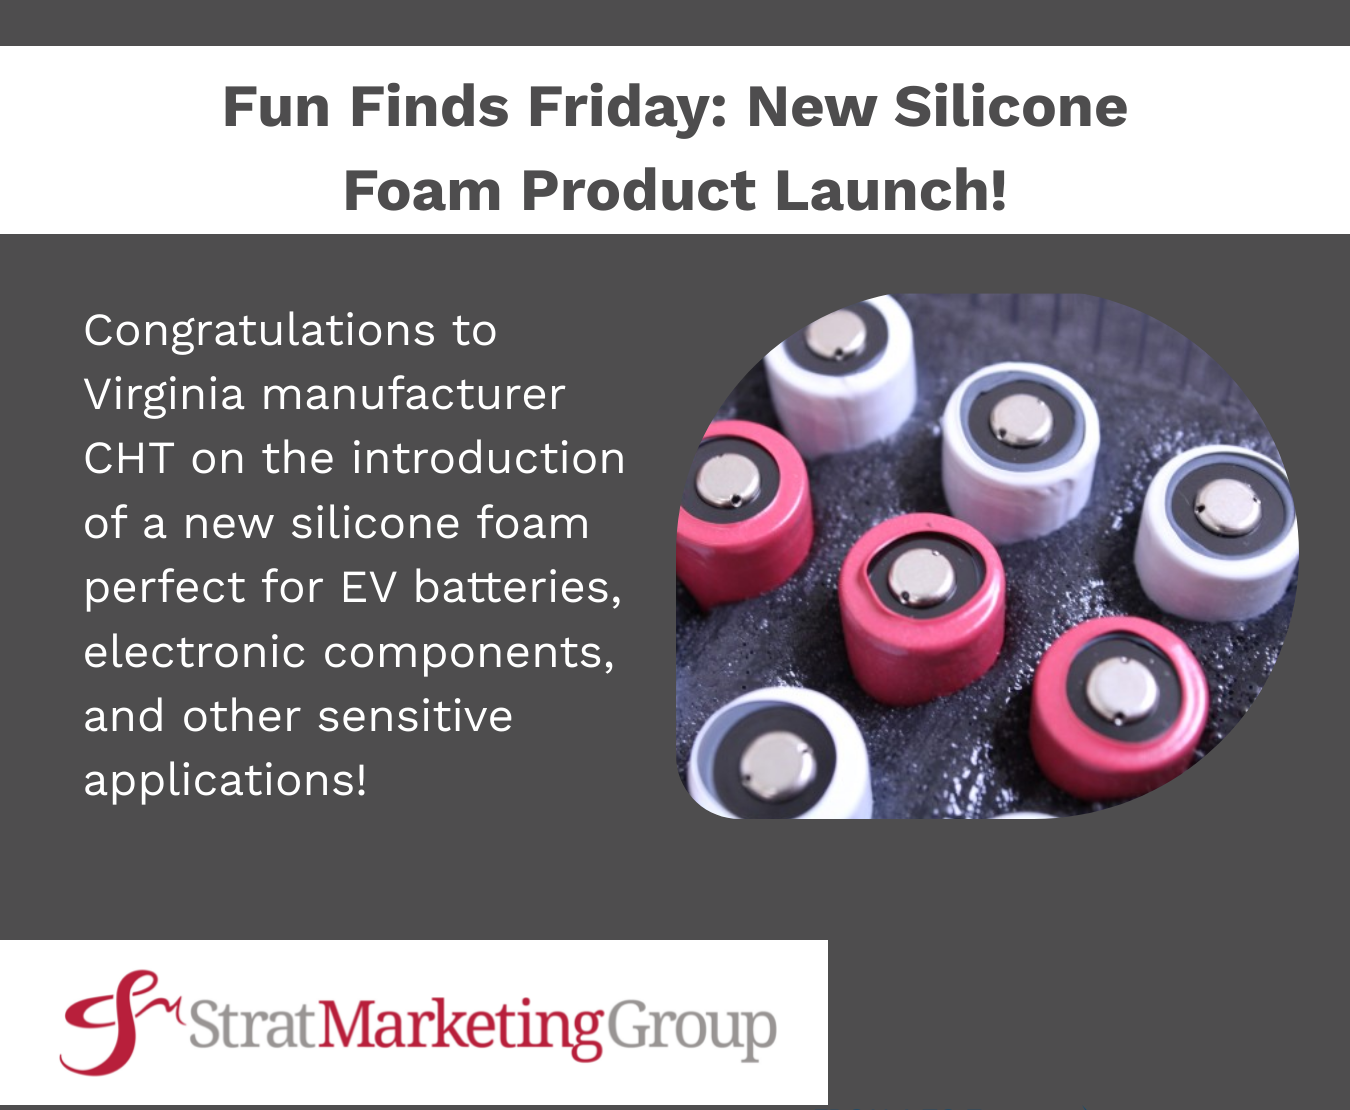 Congratulations to Virginia manufacturer CHT on the introduction of a new silicone foam perfect for EV batteries, electronic components, and other sensitive applications.